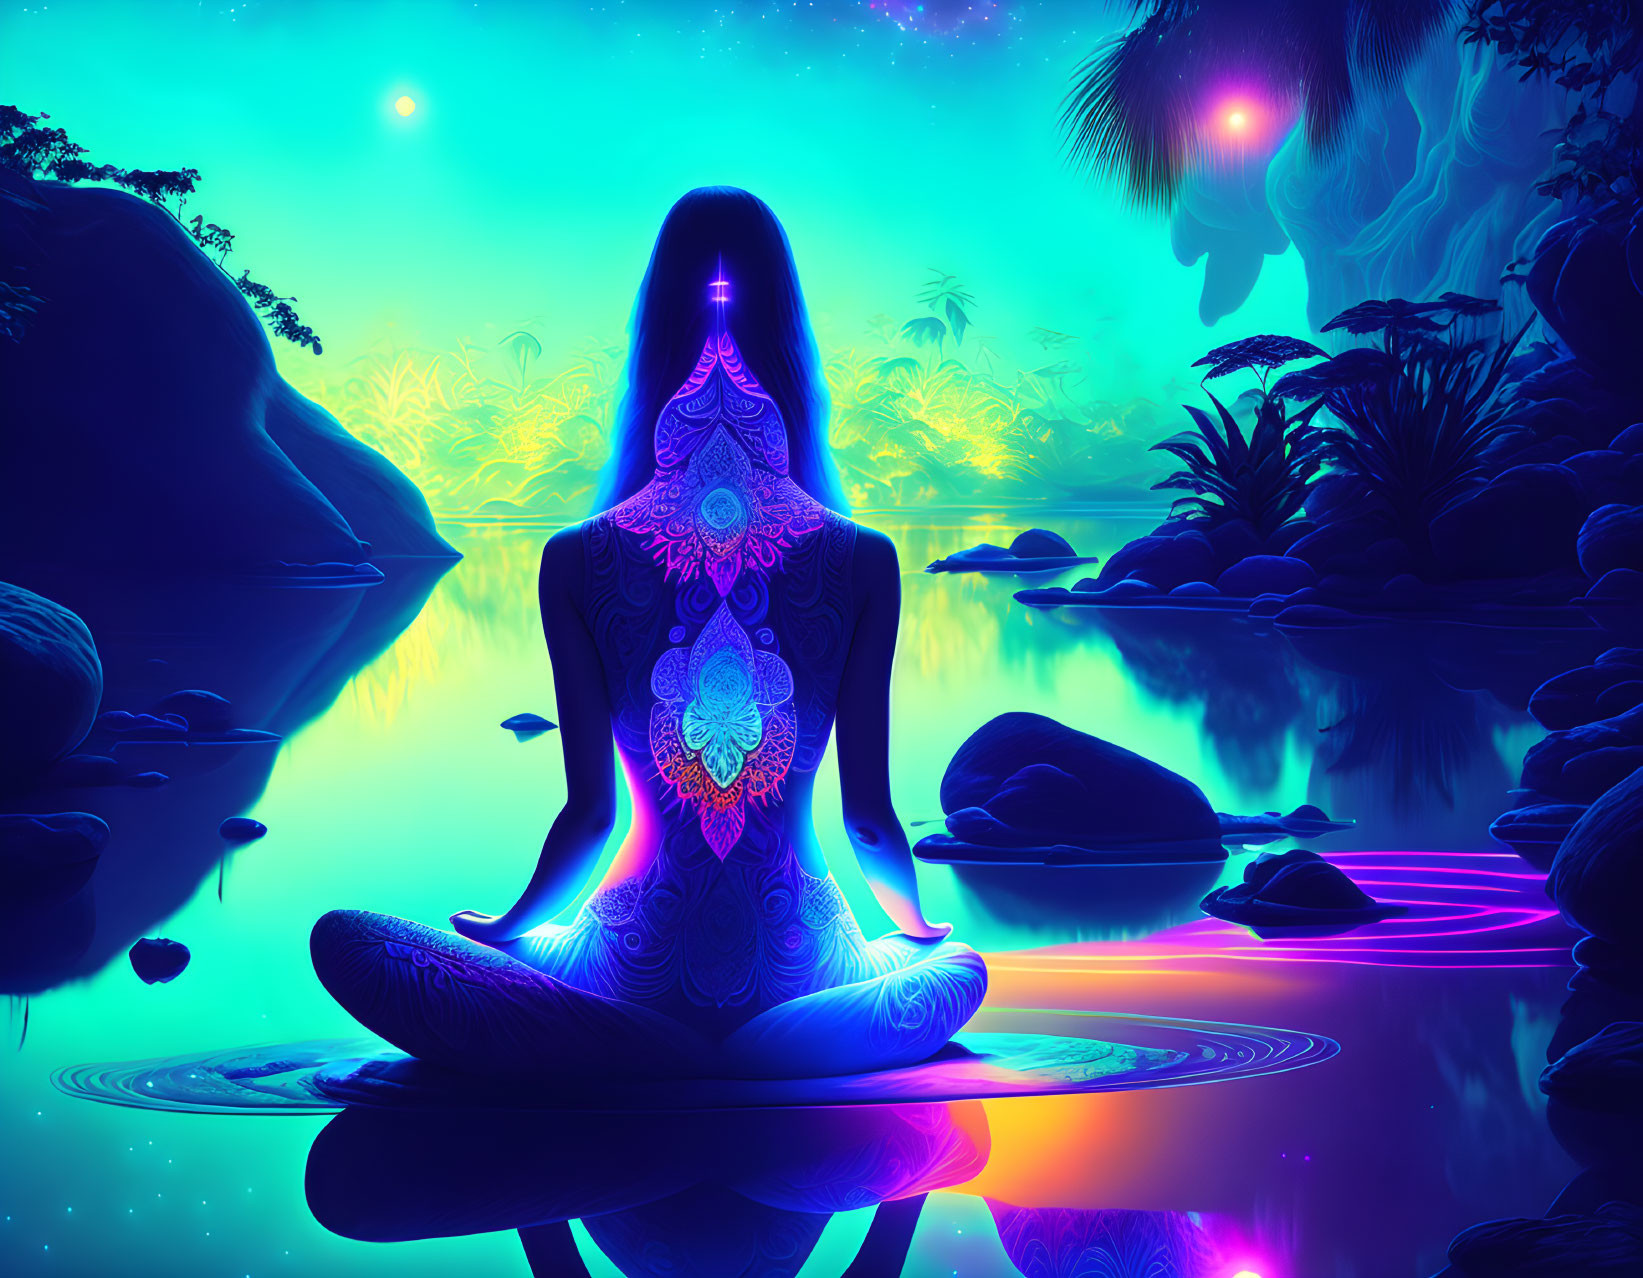 Serene lake meditation scene with neon flora and starry sky